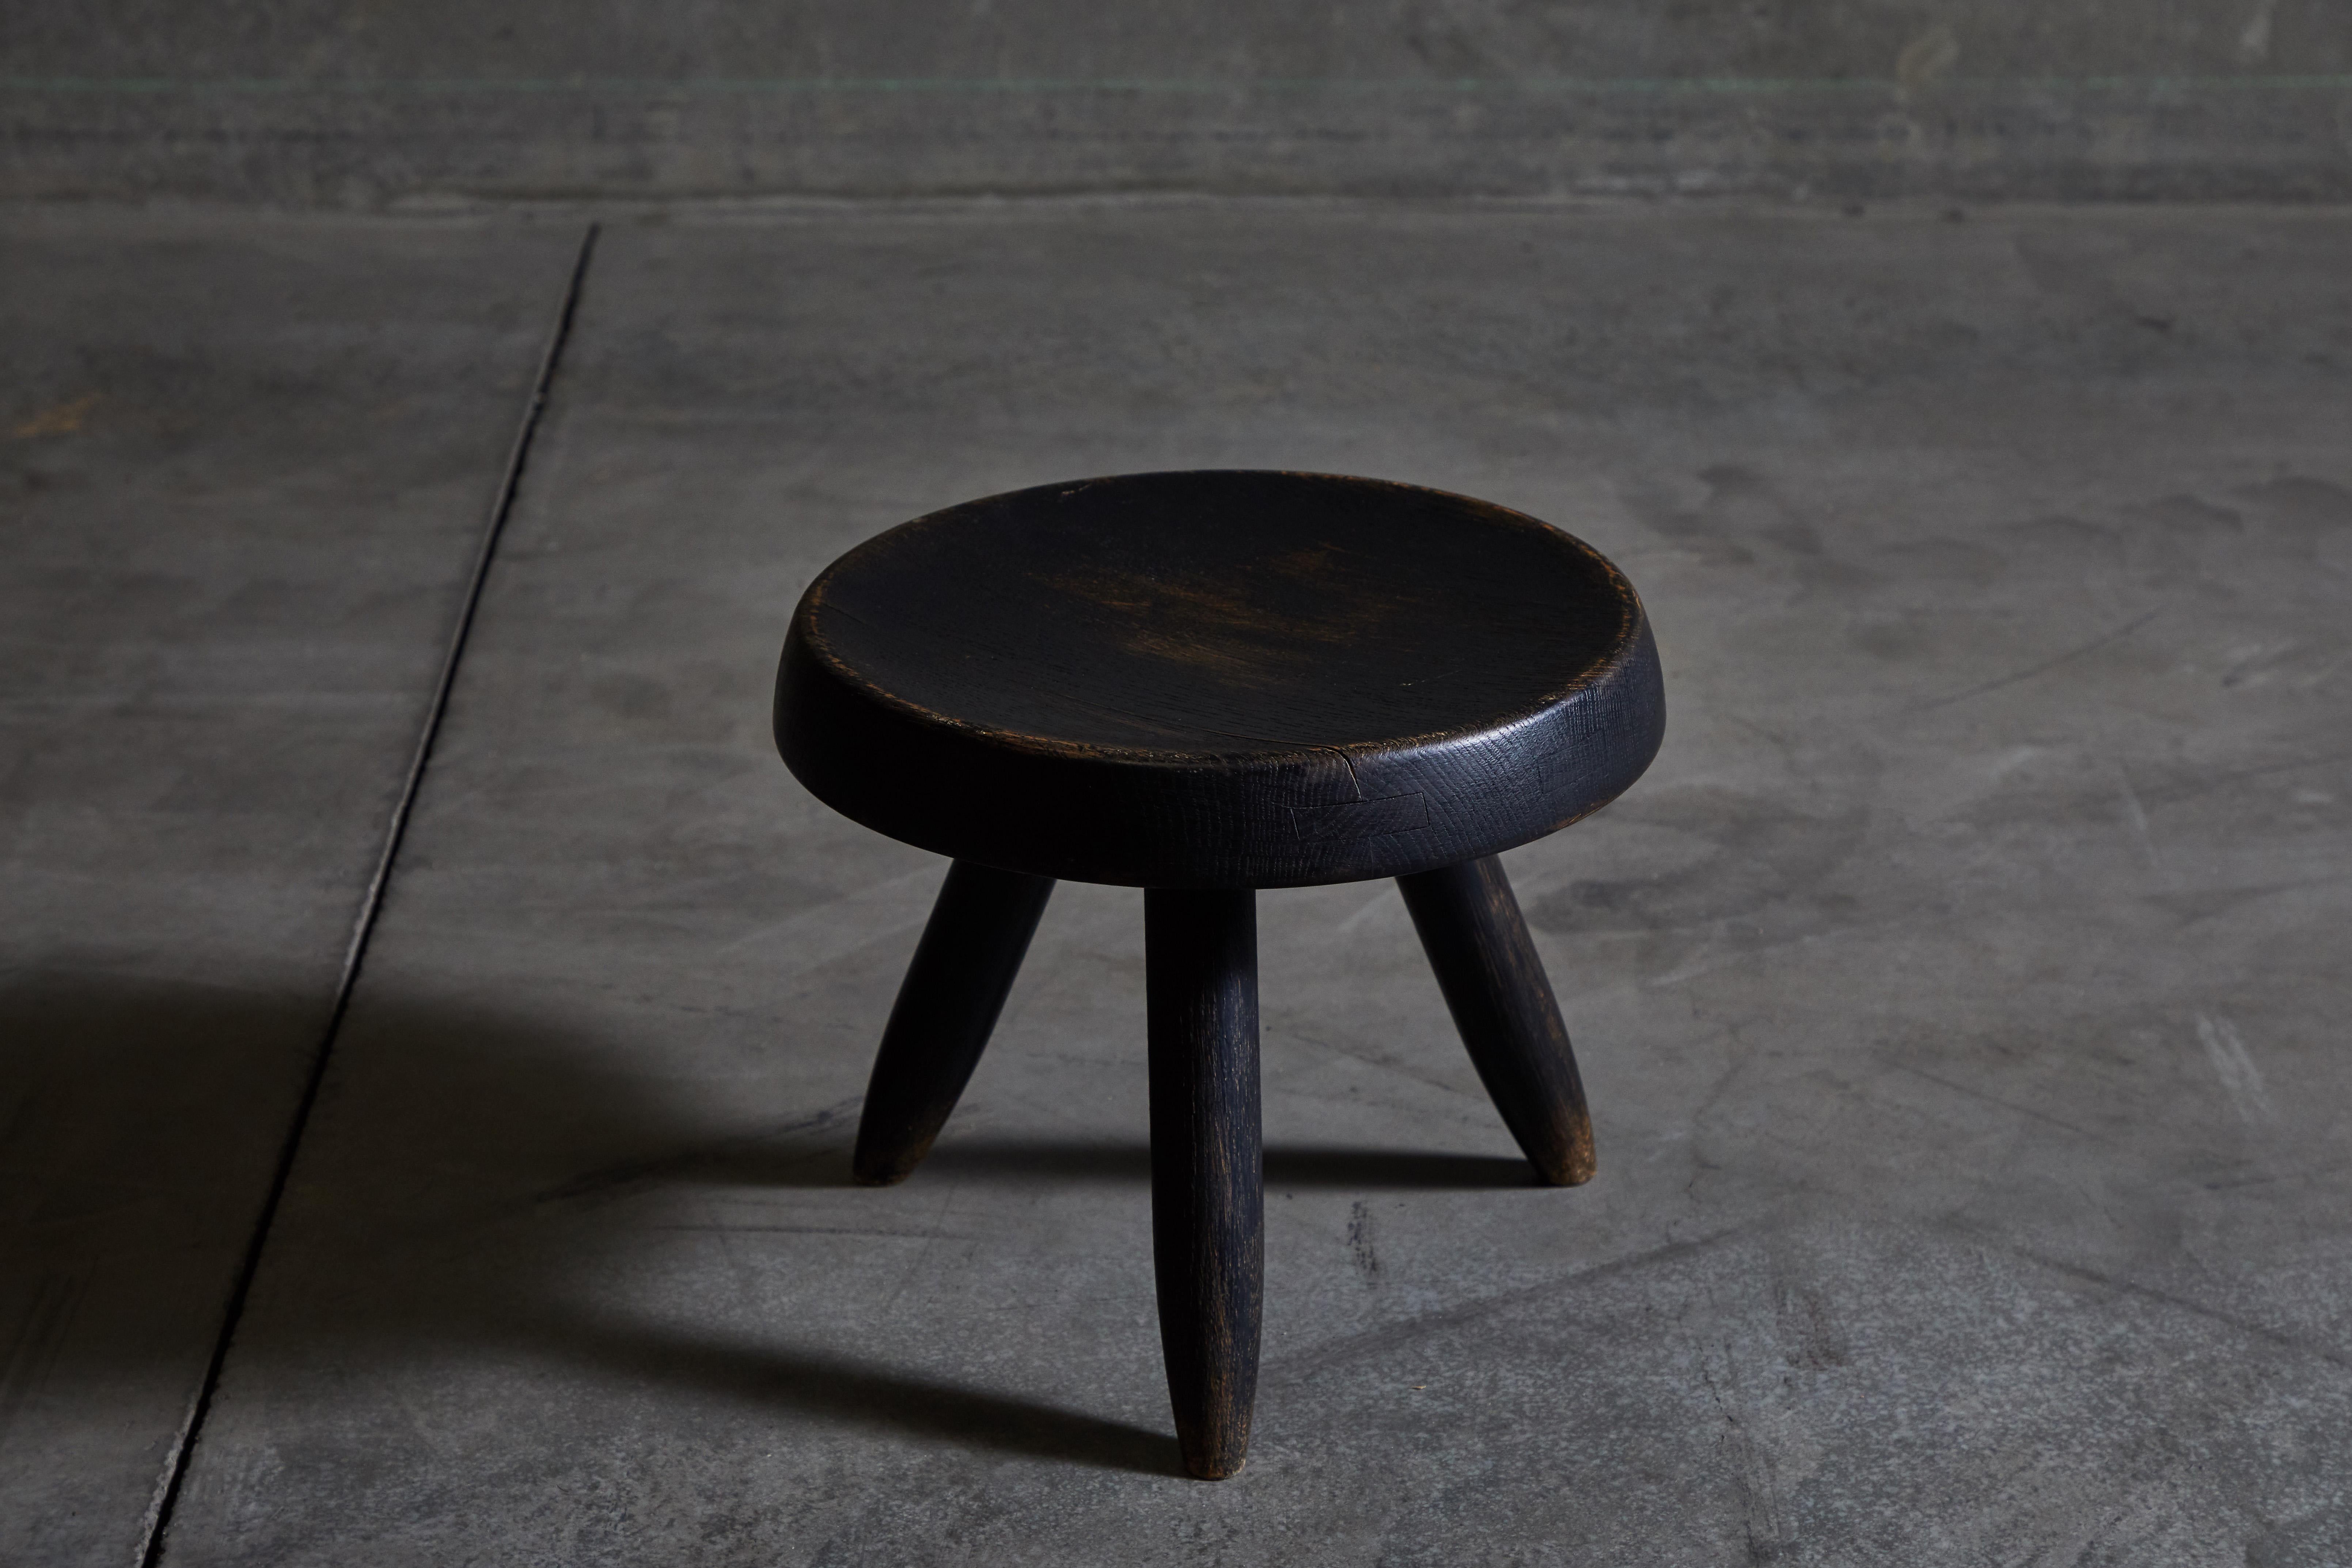 Rare black wood stool by Charlotte Perriand for Galerie Steph Simon. Made in France, circa 1950s. 

literature: Charlotte Perriand Complete Works Volume 2: 1940-1955, Barsac, pg. 458 Les Décorateurs Des Années 50, Favardin, pg. 137 Charlotte